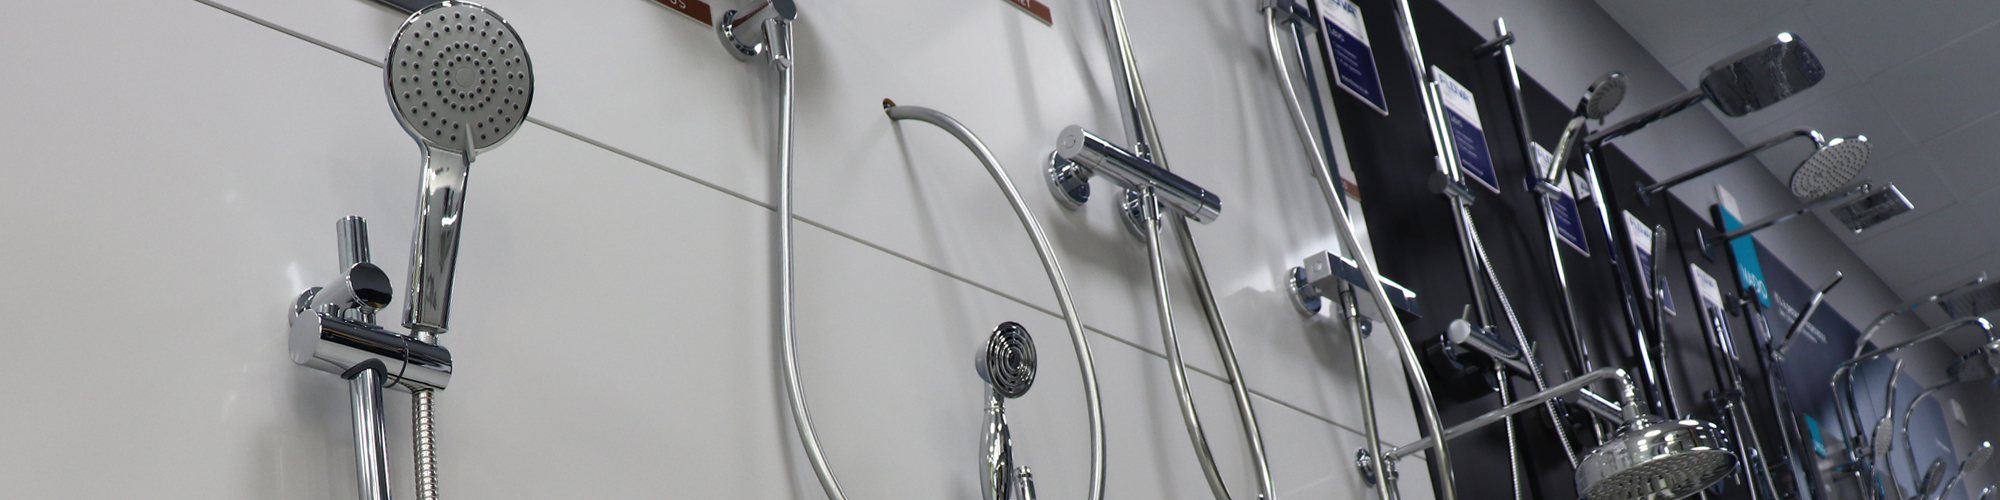 Showers, electric showers, mixer showers, hot water system,thermostatic, Plumbline